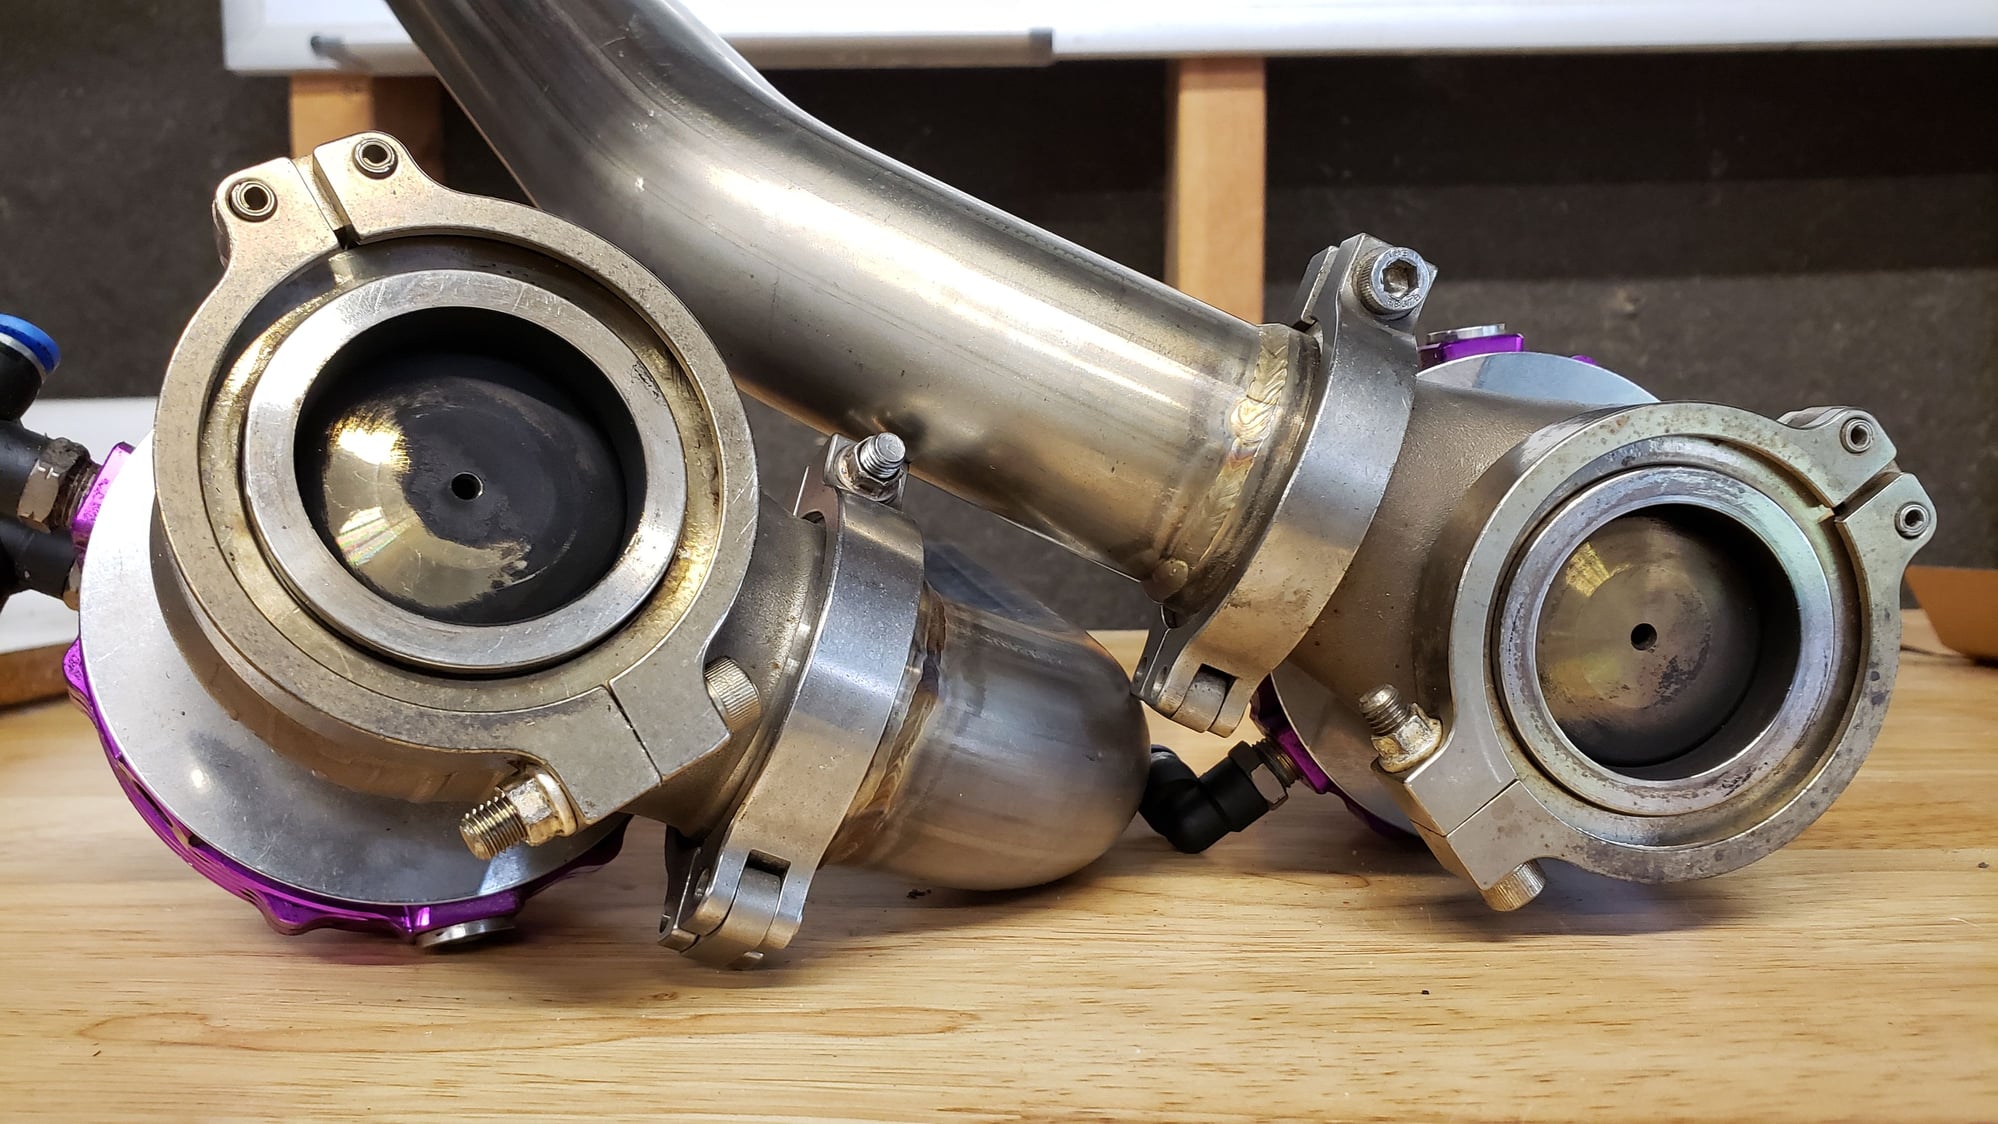 Engine - Exhaust - Authentic Tial MVR 44mm gates in purple - Used - All Years Any Make All Models - Deatsville, AL 36022, United States